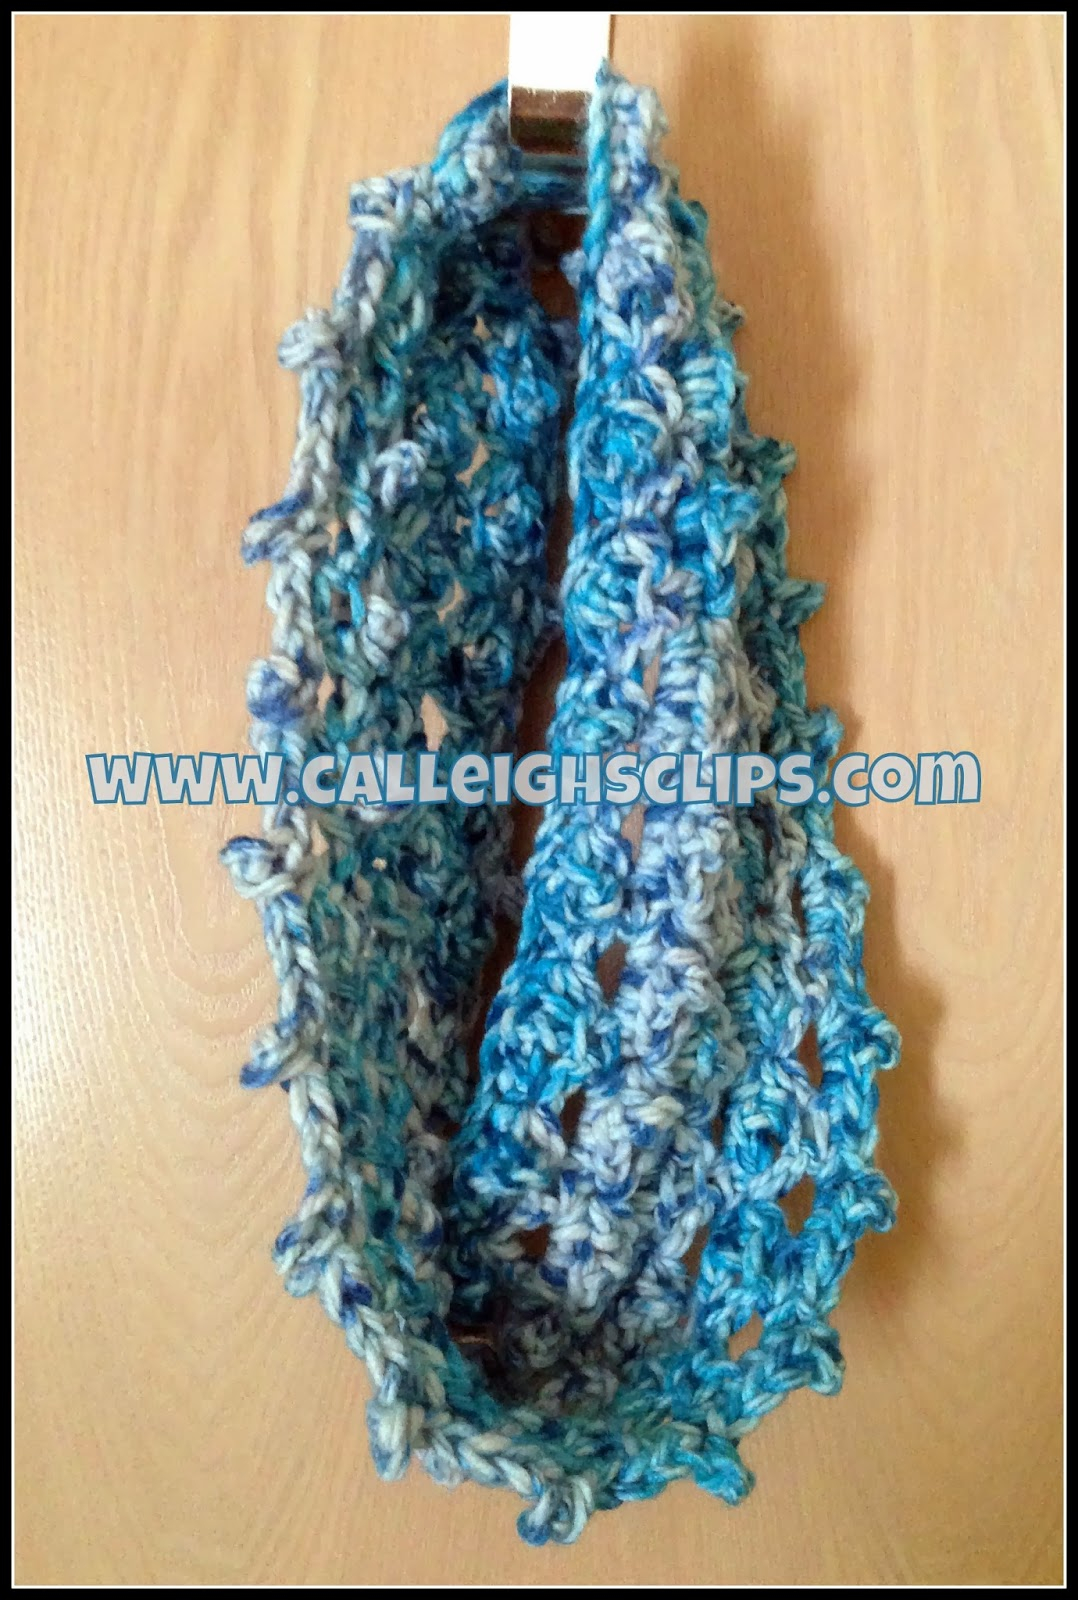 Free Mobius Scarf Knitting Pattern Calleighs Clips Crochet Creations Arctic Ocean Mobius Cowl